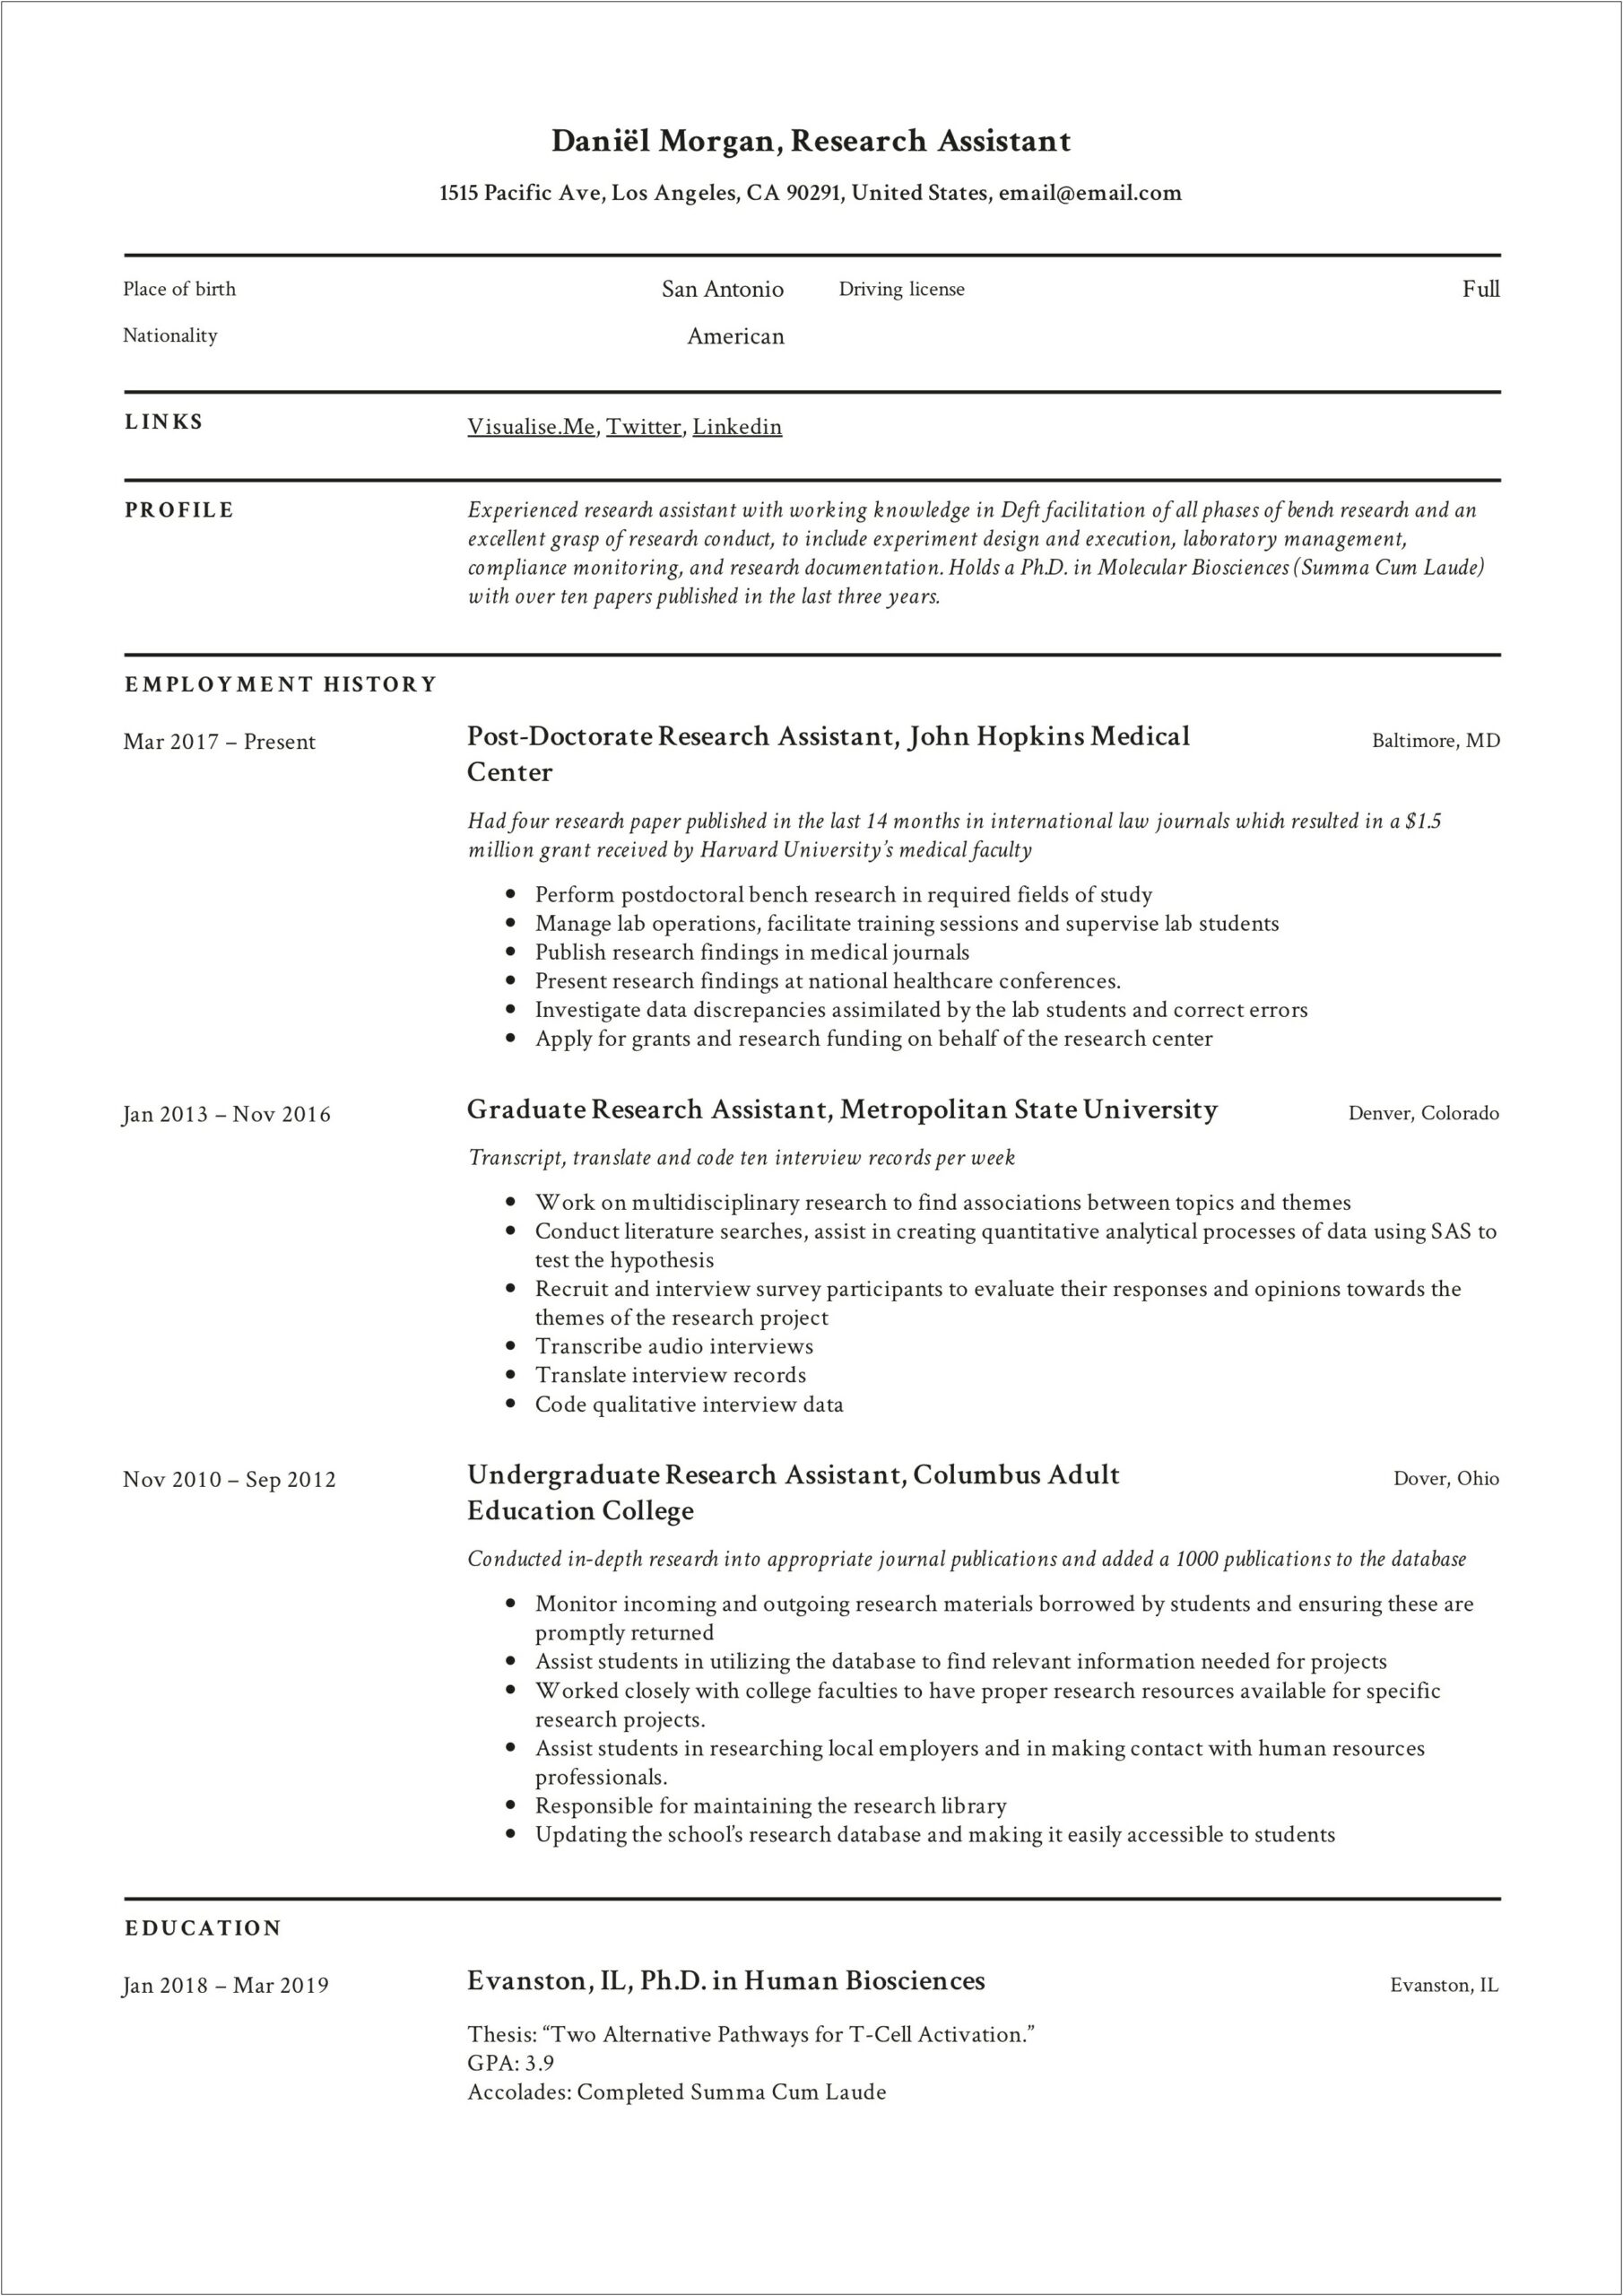 Resume Working With People In Psychology Research